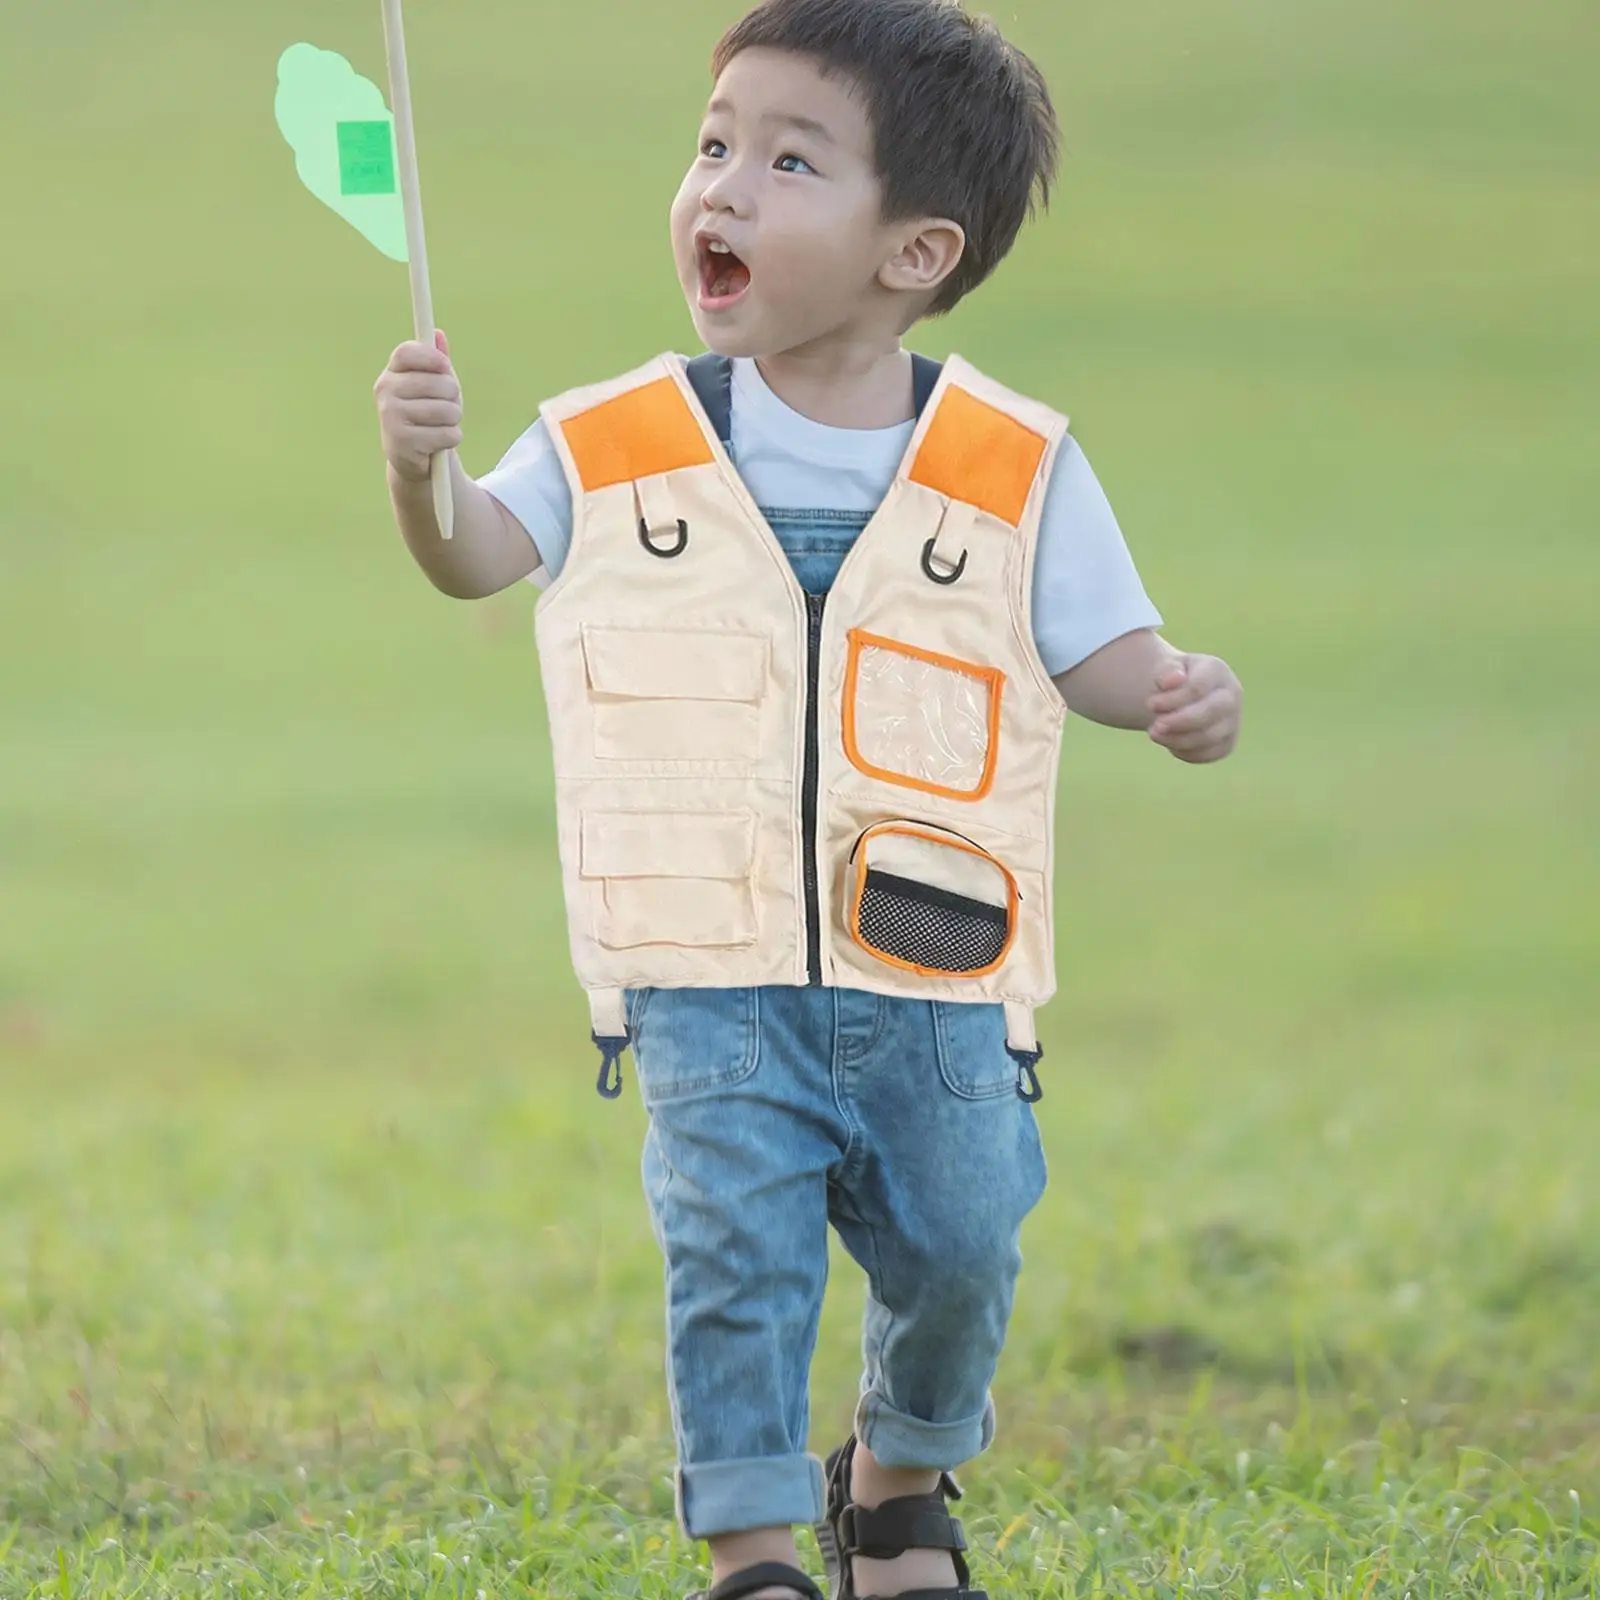 

Kids Explorer Vest Comfortable Outfit Outfit Role Play Cargo Vest Party Costume Vest for Outdoor Hiking Camping Boys Girls Kids